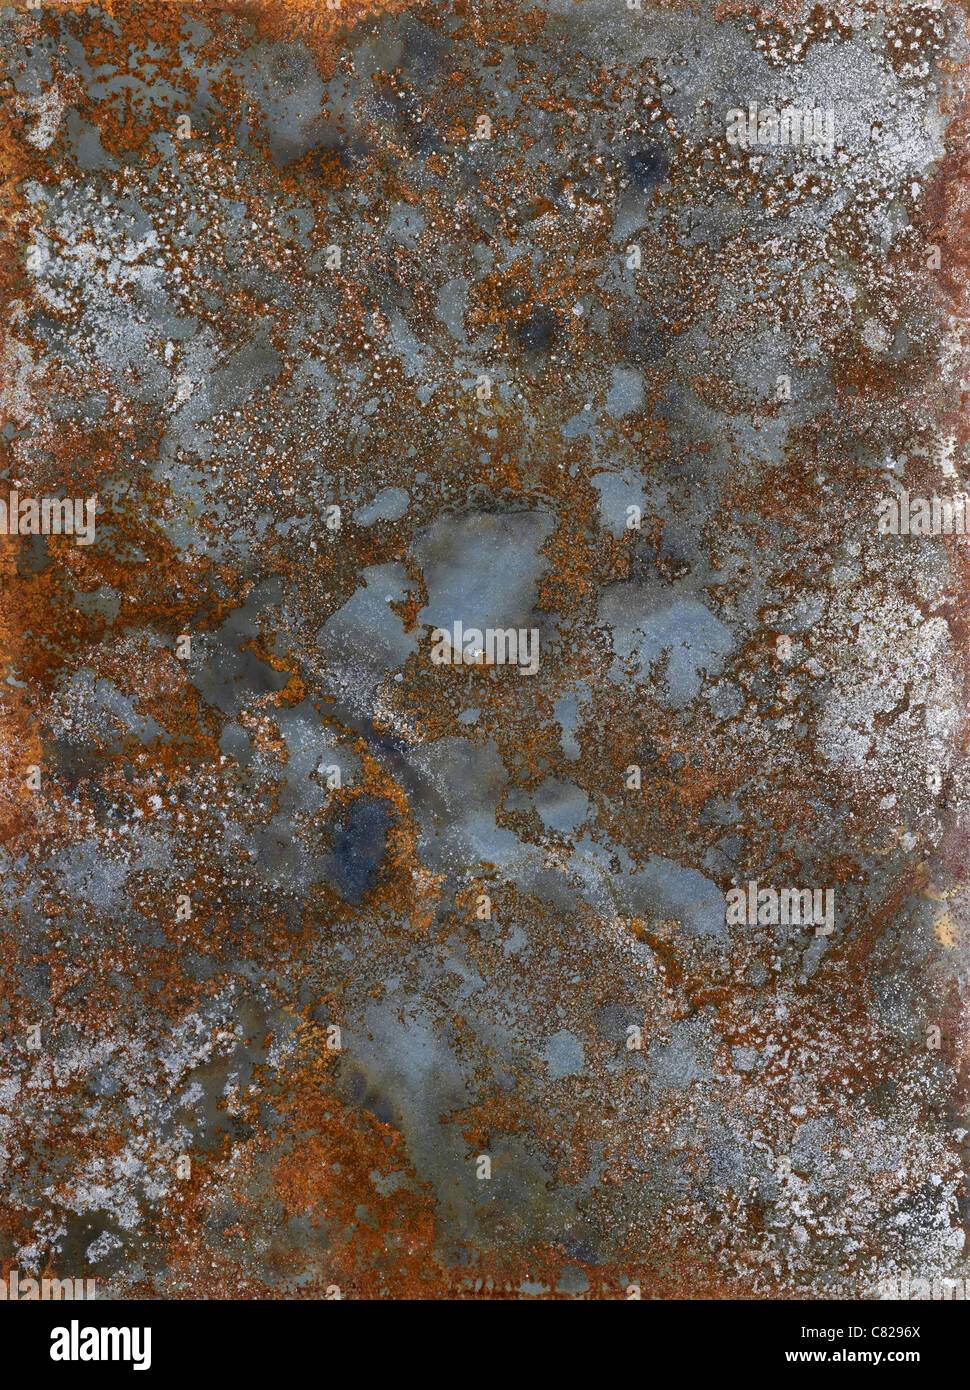 picture painted by me, named 'Corrosion'. It shows a abstrackt modified corroded and tarnished metallic surface Stock Photo